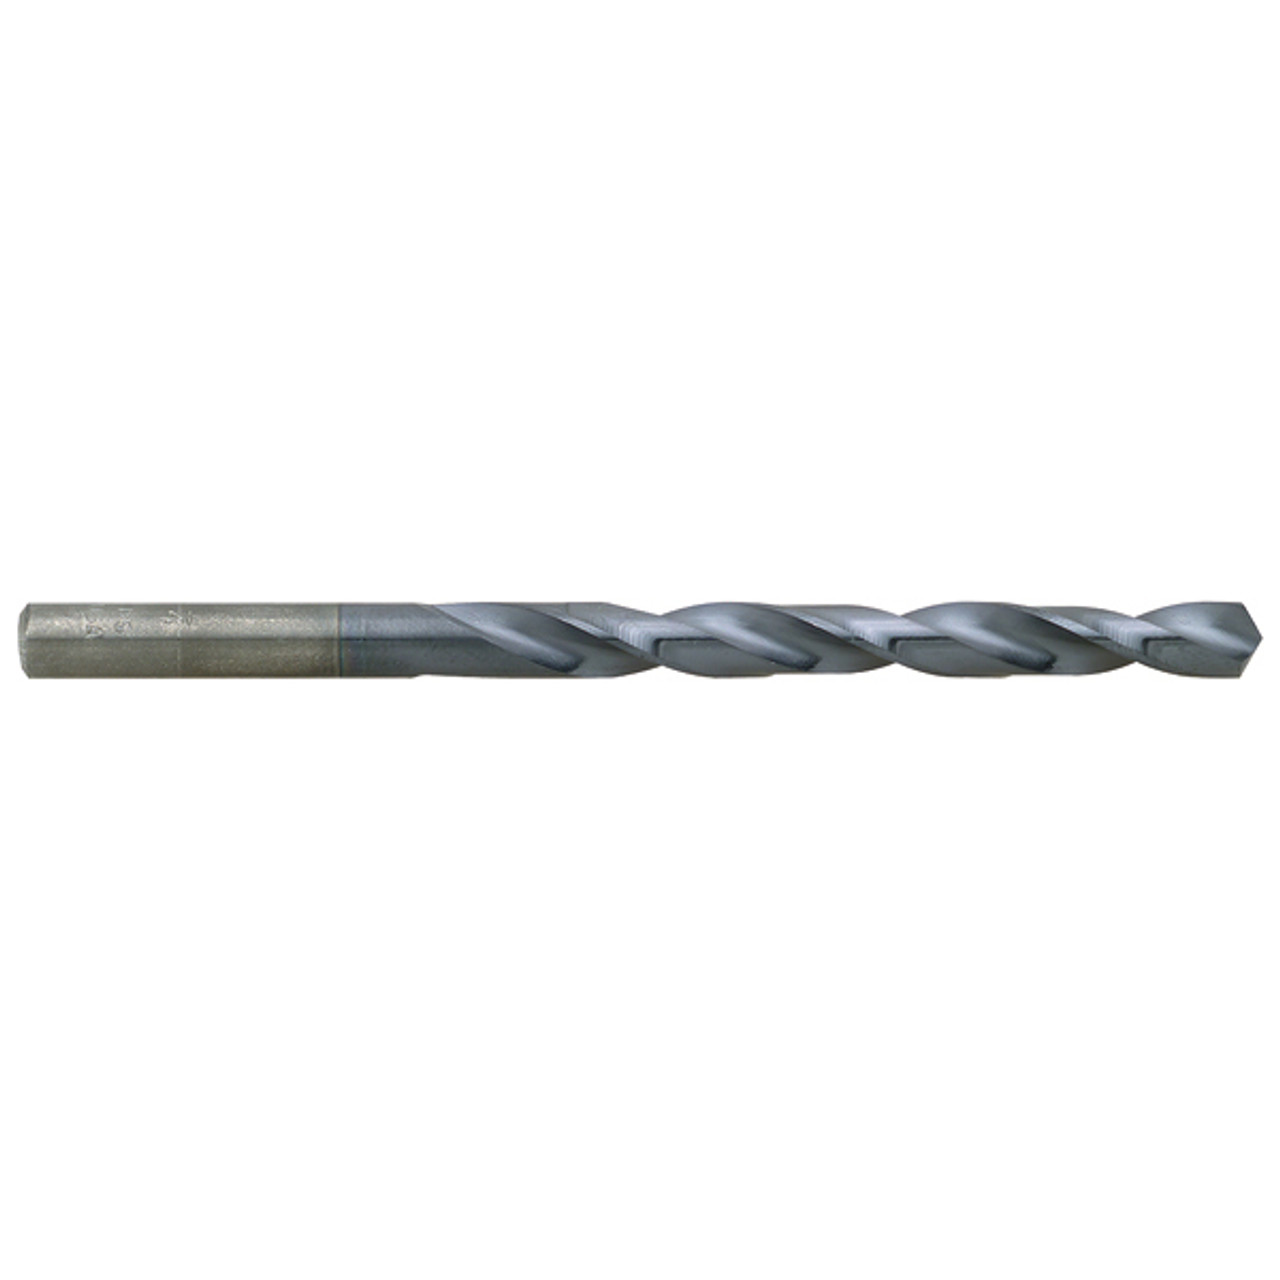 09-003-226      Z A3-TIALN HSS DRILLCOATED